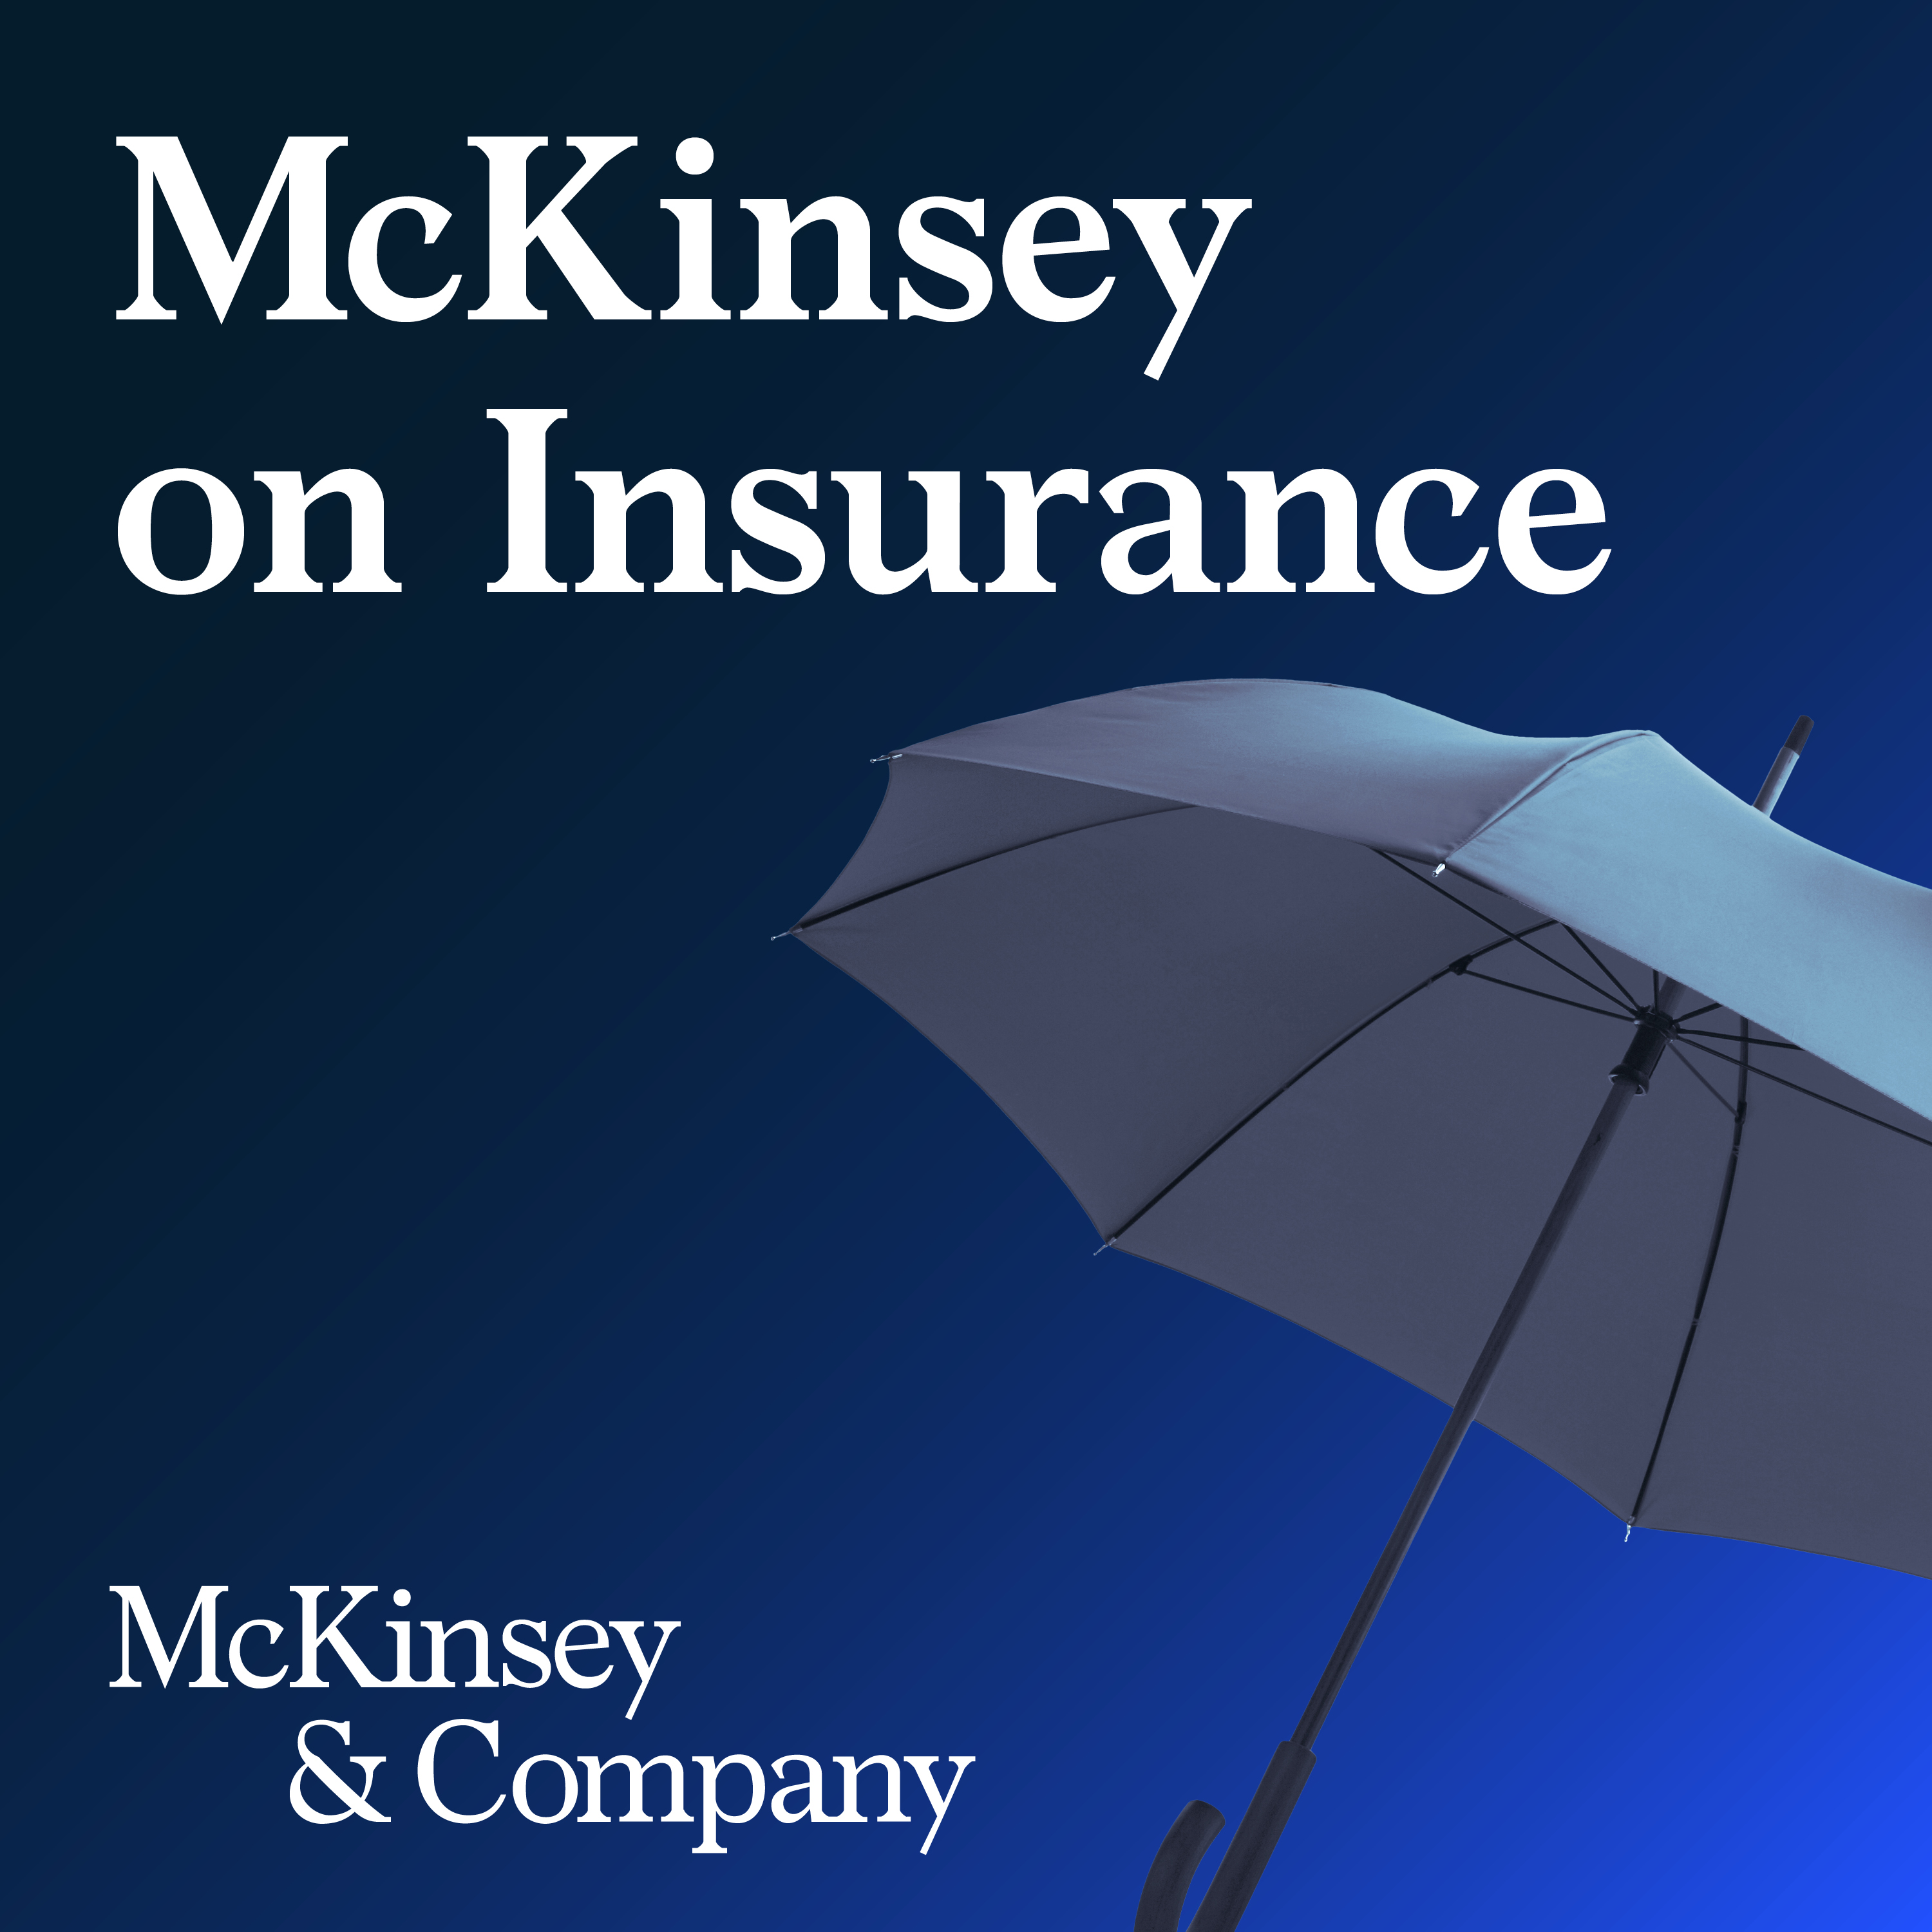 What’s ahead for commercial property and casualty insurance